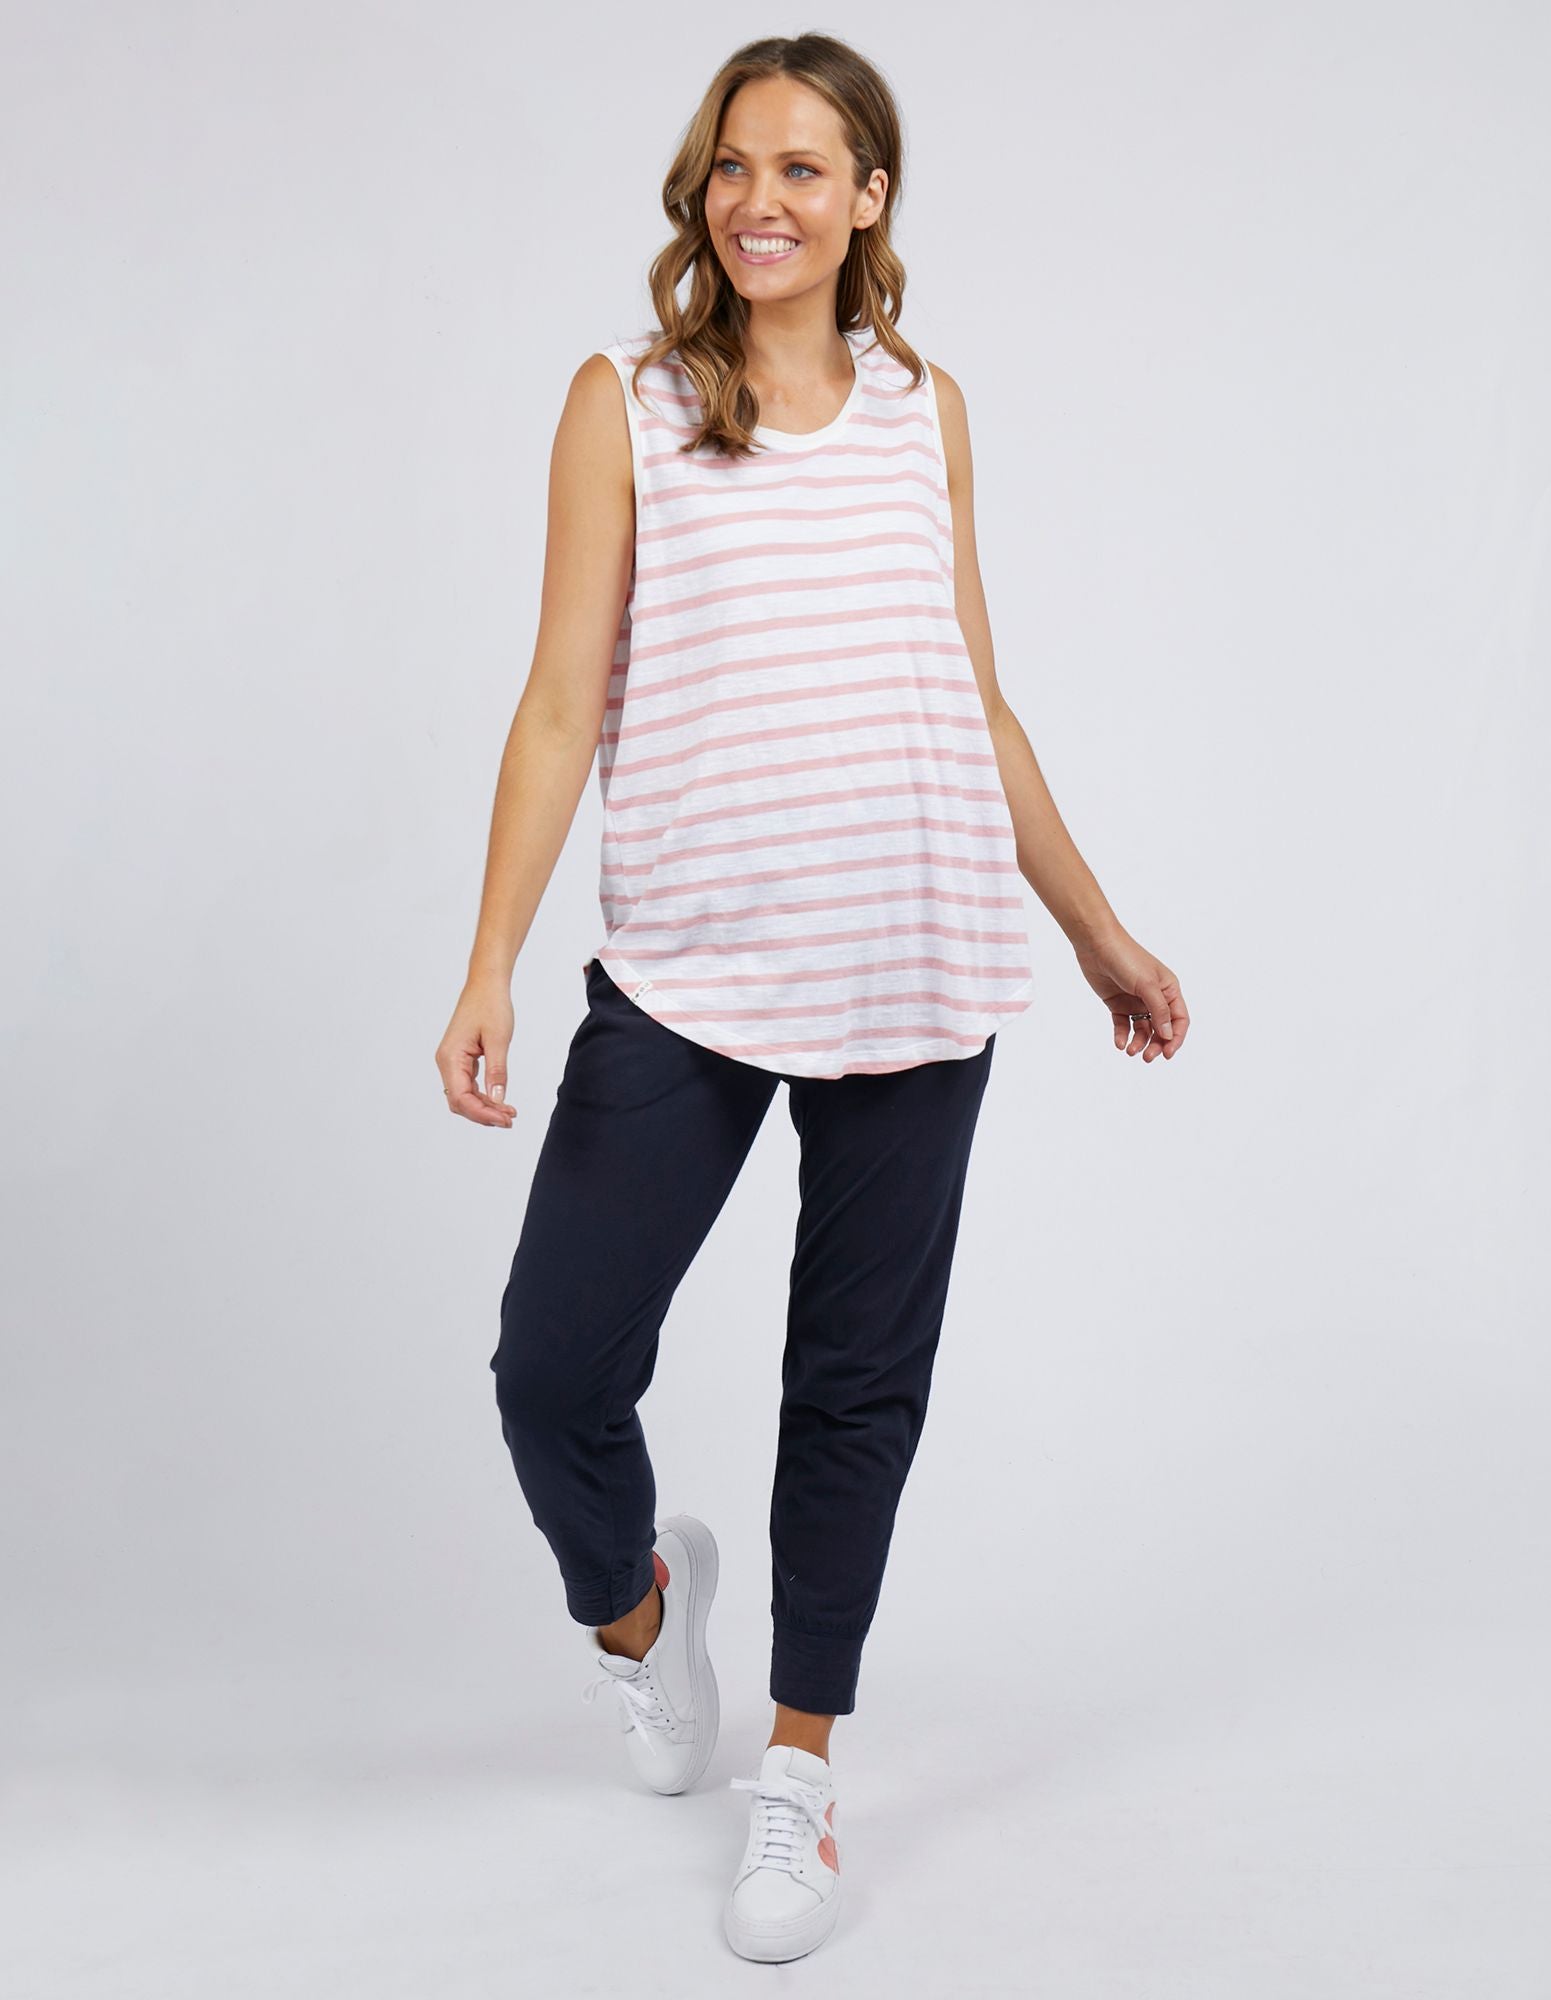 Scoop Tank - White And Coral Blush Stripe - Elm Lifestyle - FUDGE Gifts Home Lifestyle